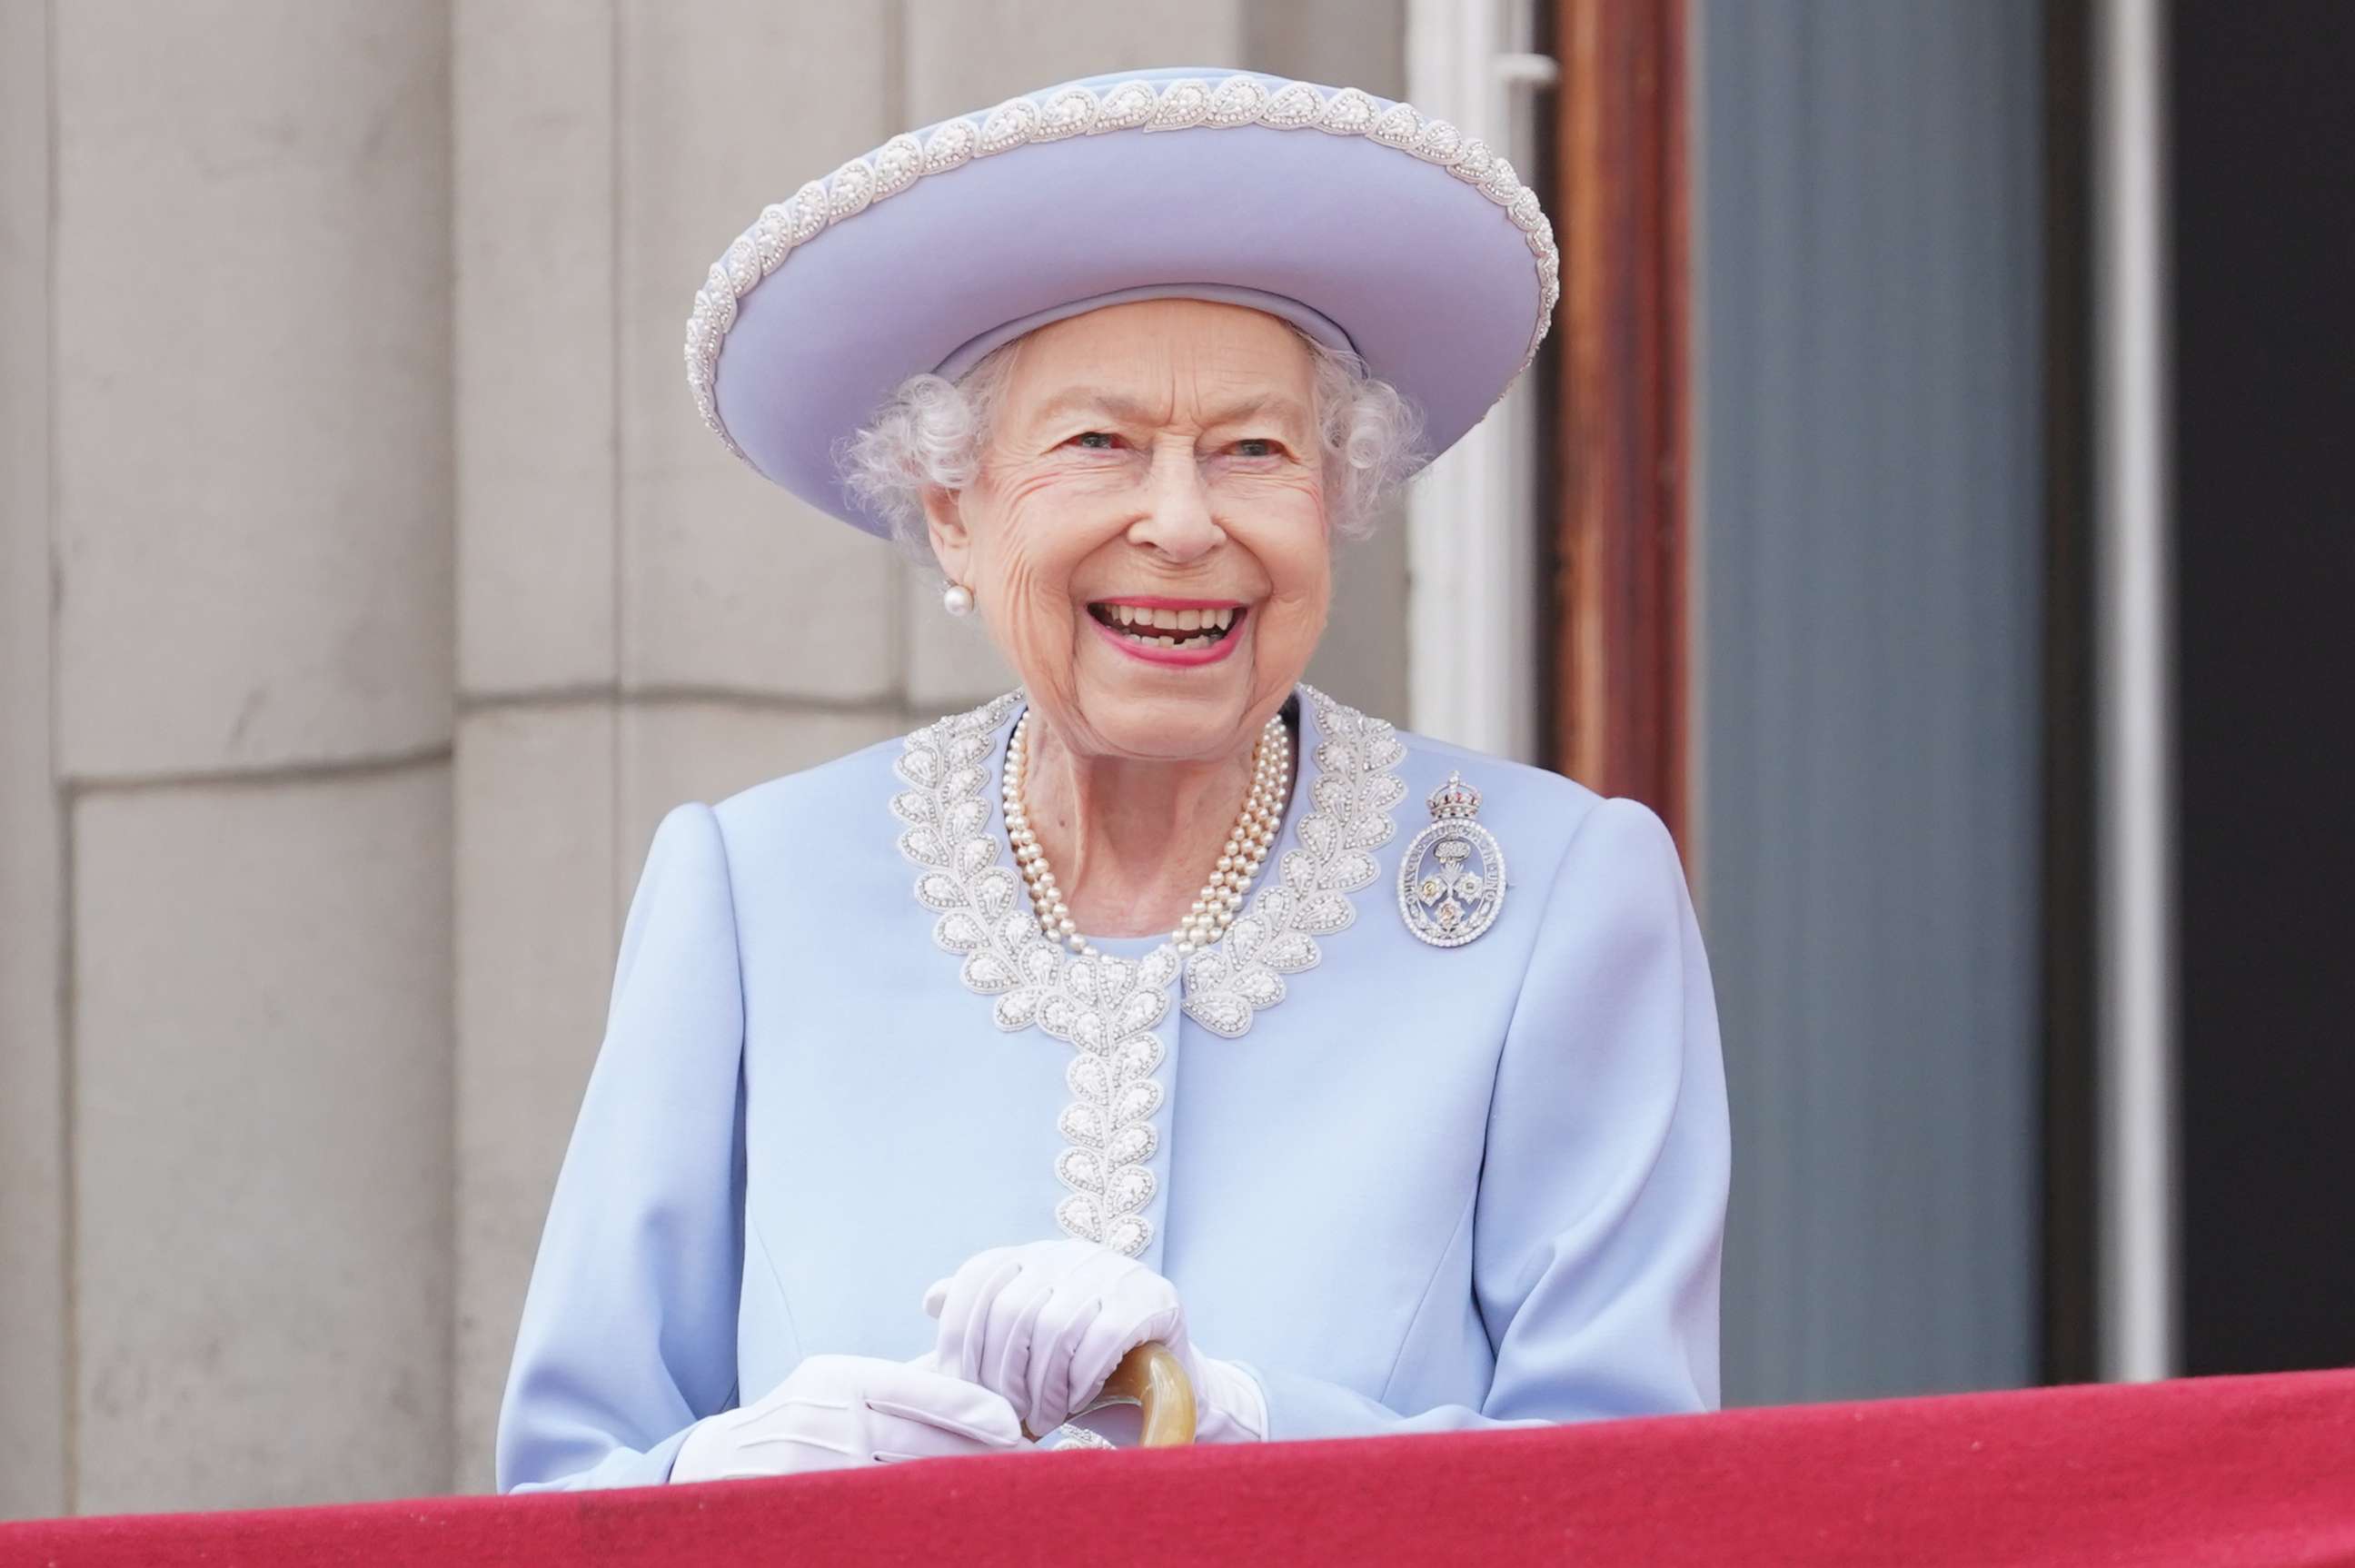 PHOTO: Queen Elizabeth II watches from the balcony of Buckingham Palace during the Trooping the Colour parade the Trooping the Colour parade, June 2, 2022, in London.